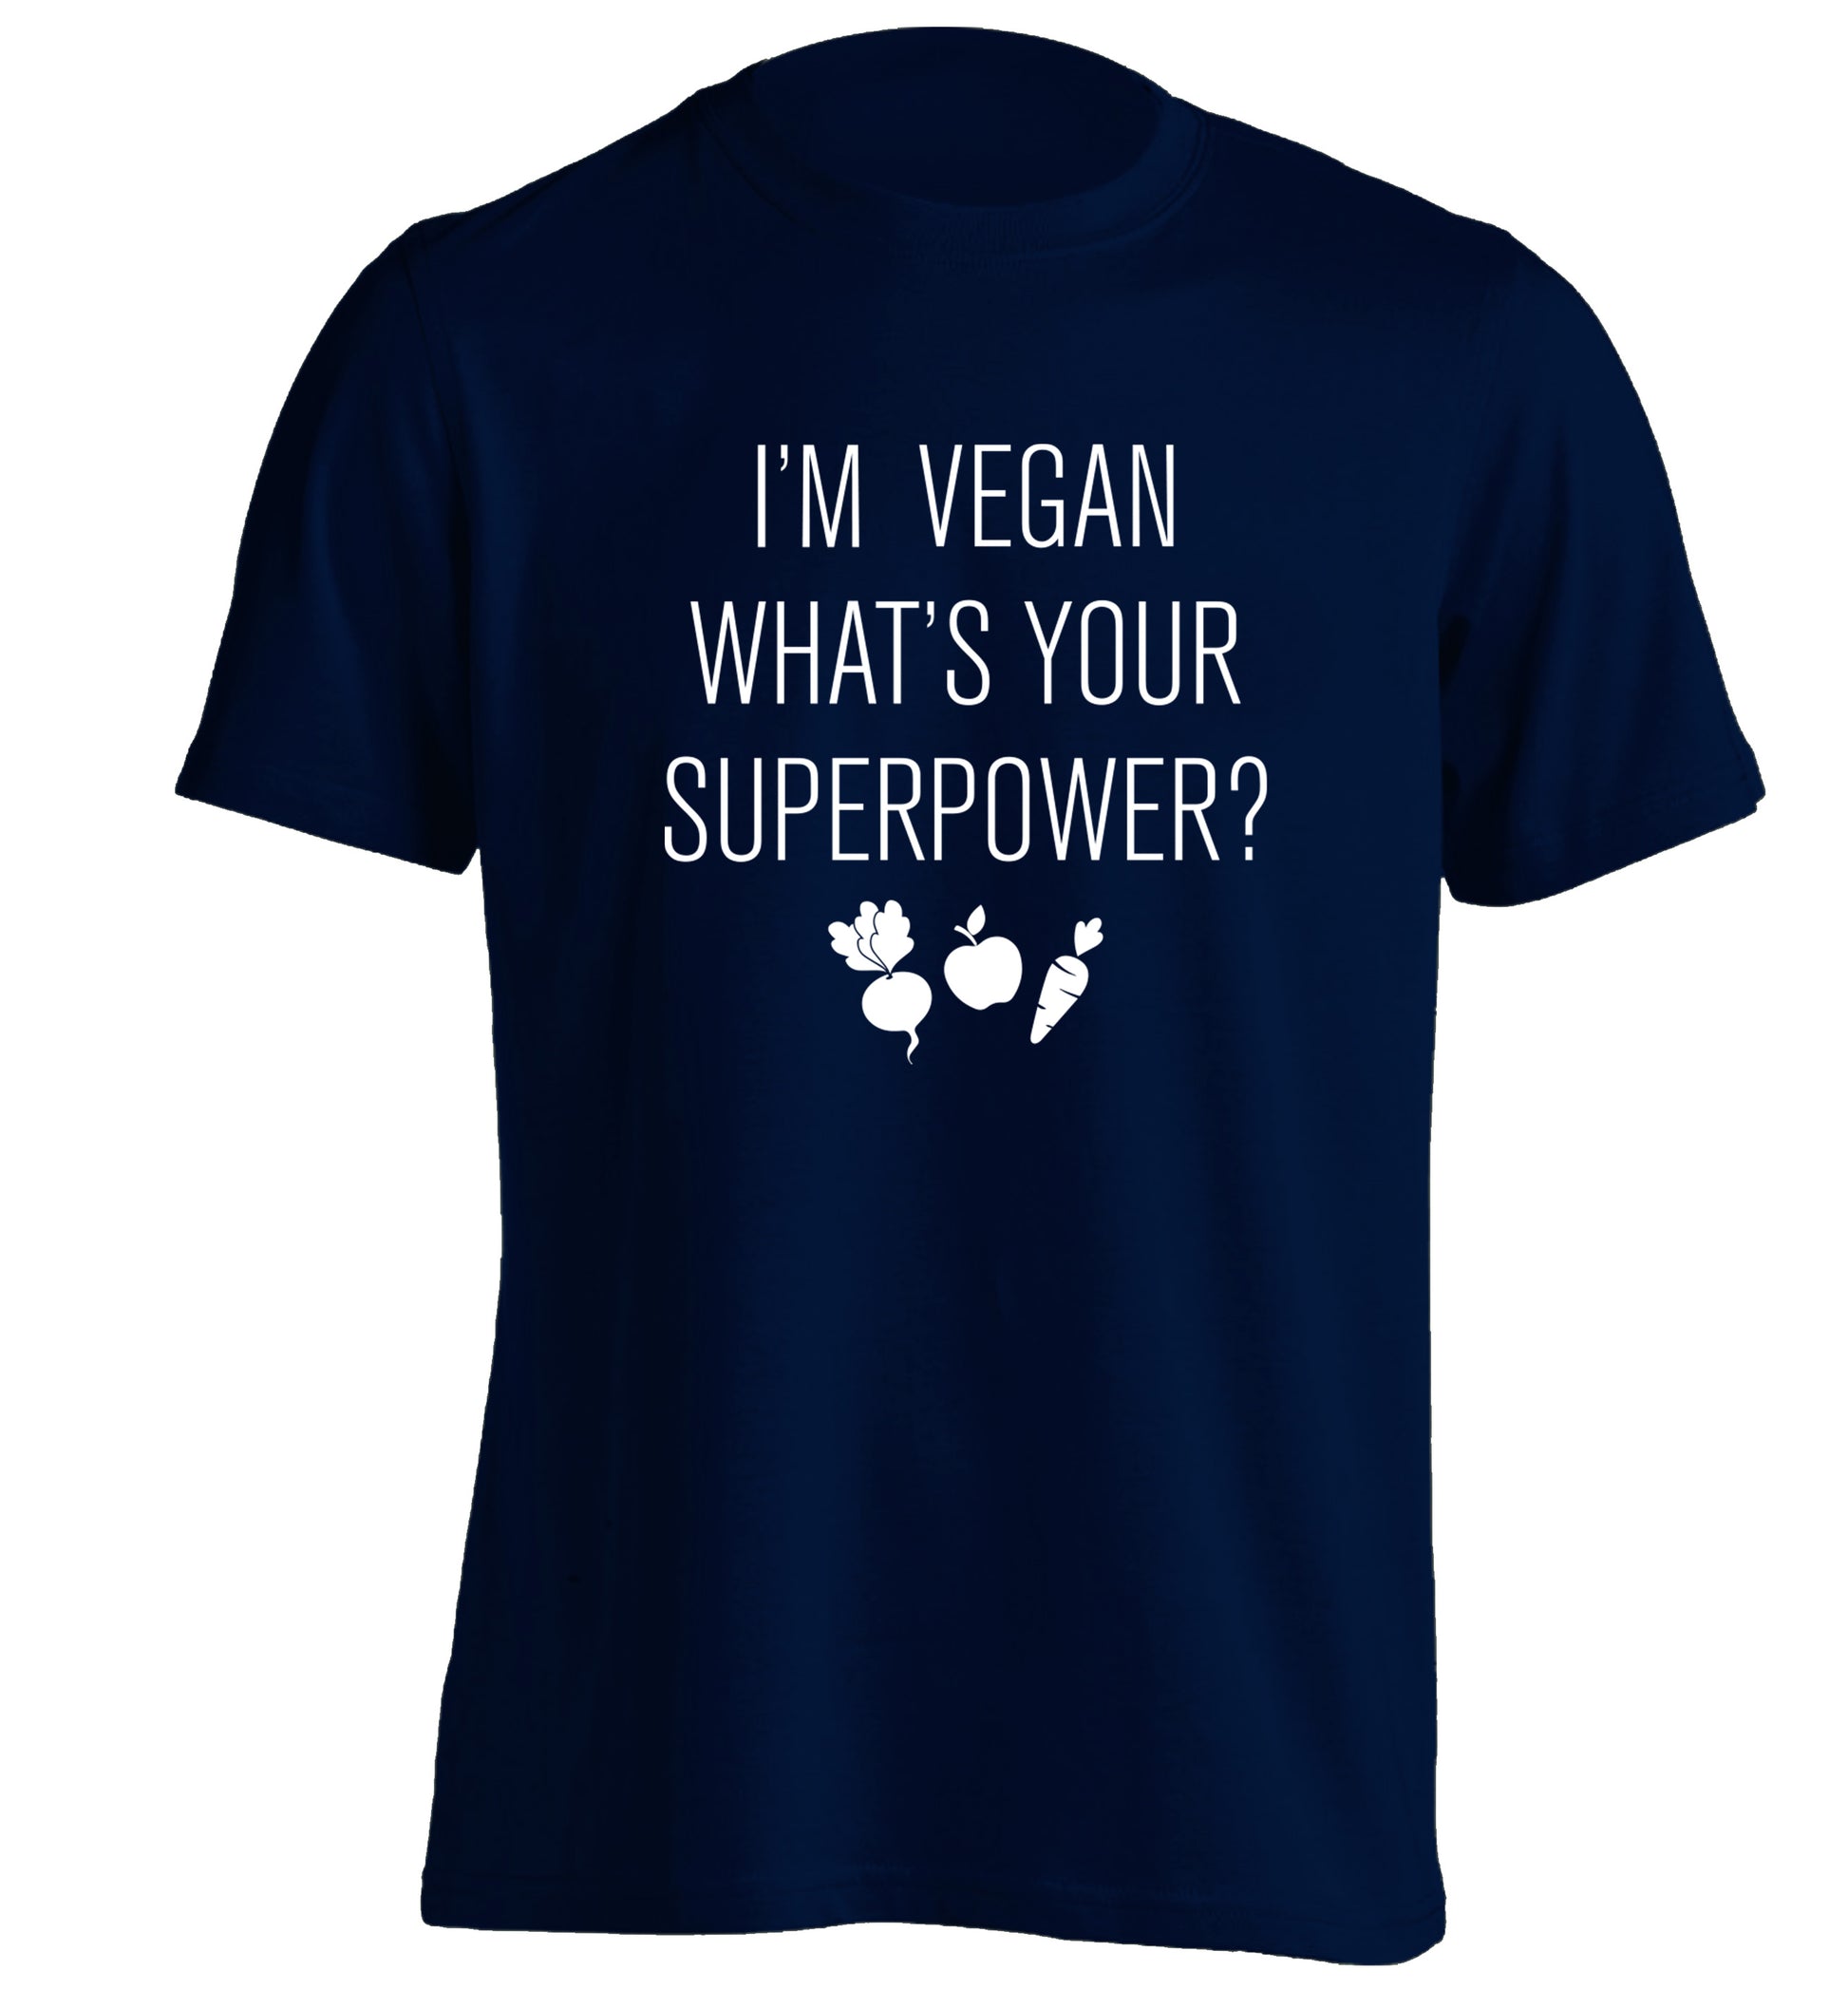 I'm Vegan What's Your Superpower? adults unisex navy Tshirt 2XL